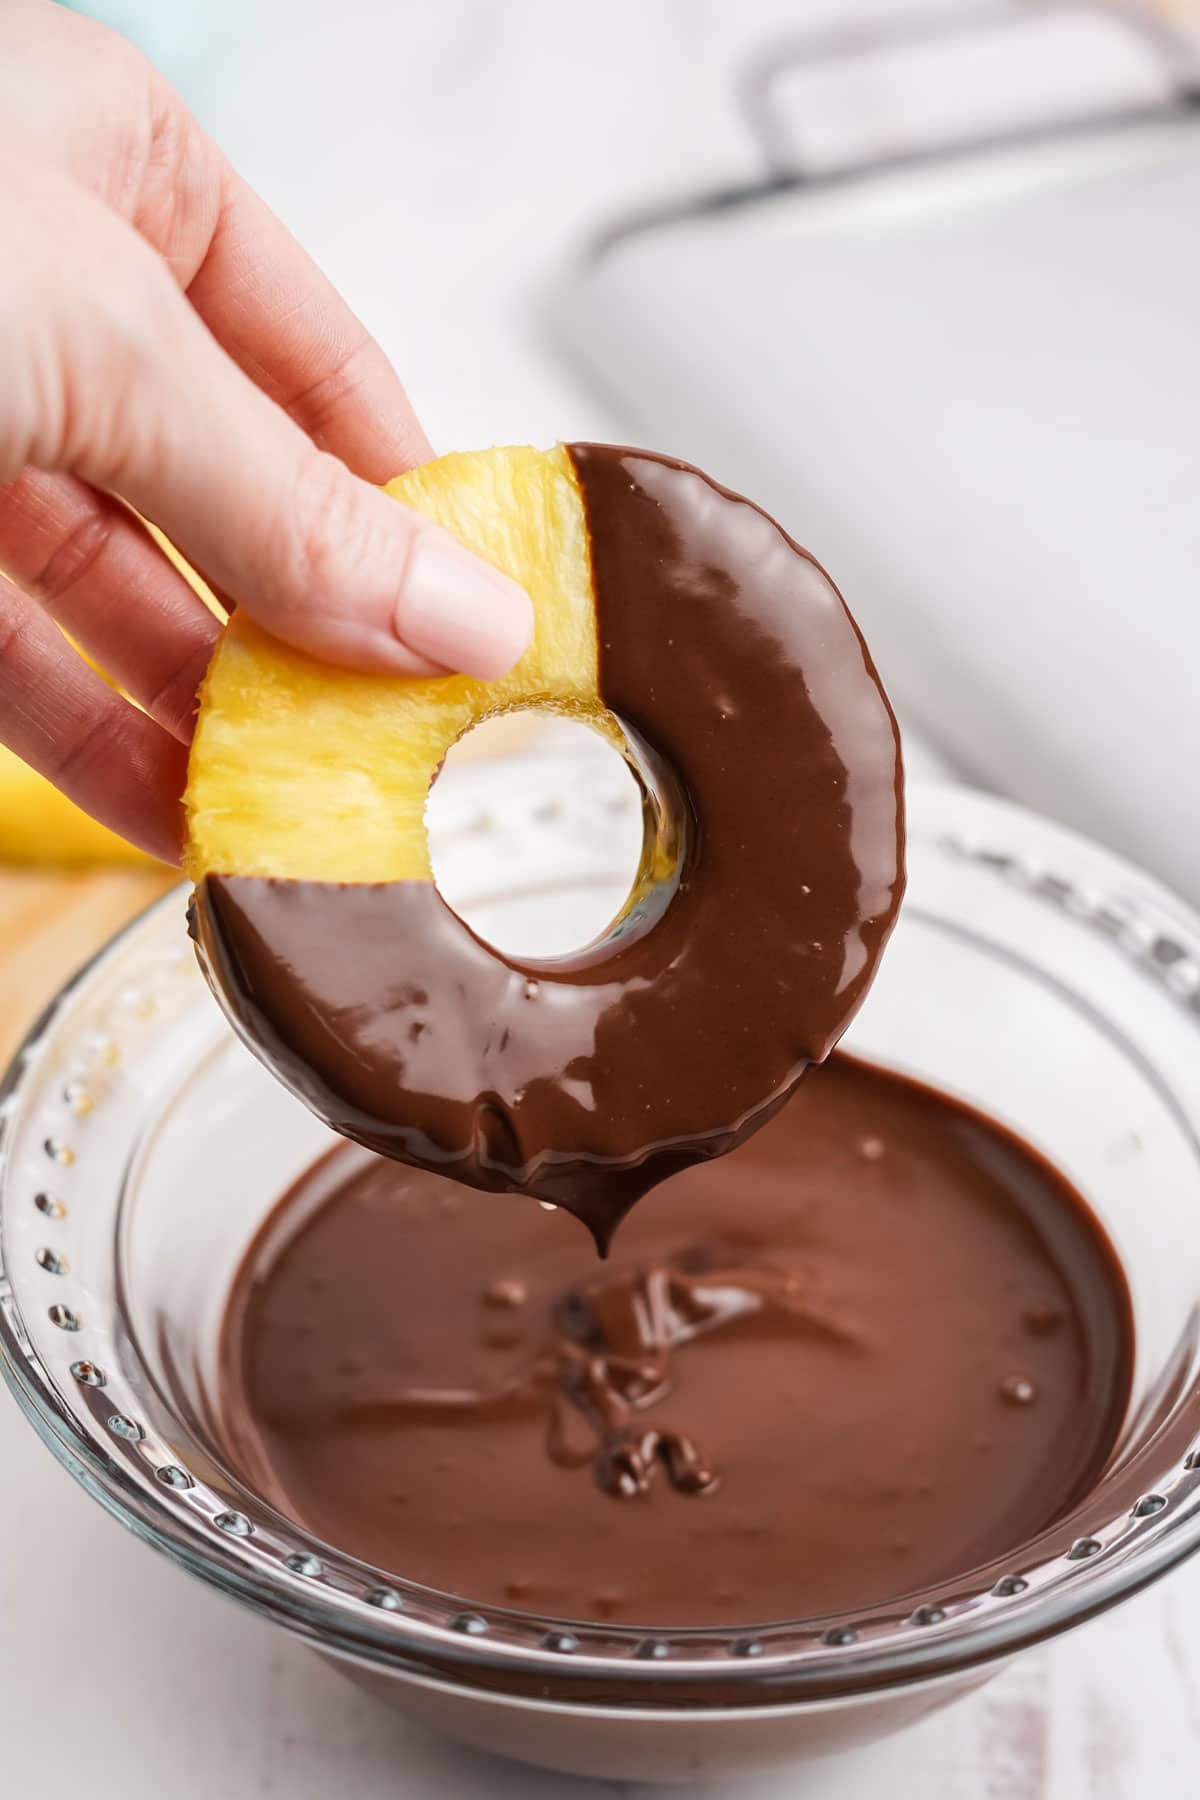 Dipping the pineapple rings into chocolate.